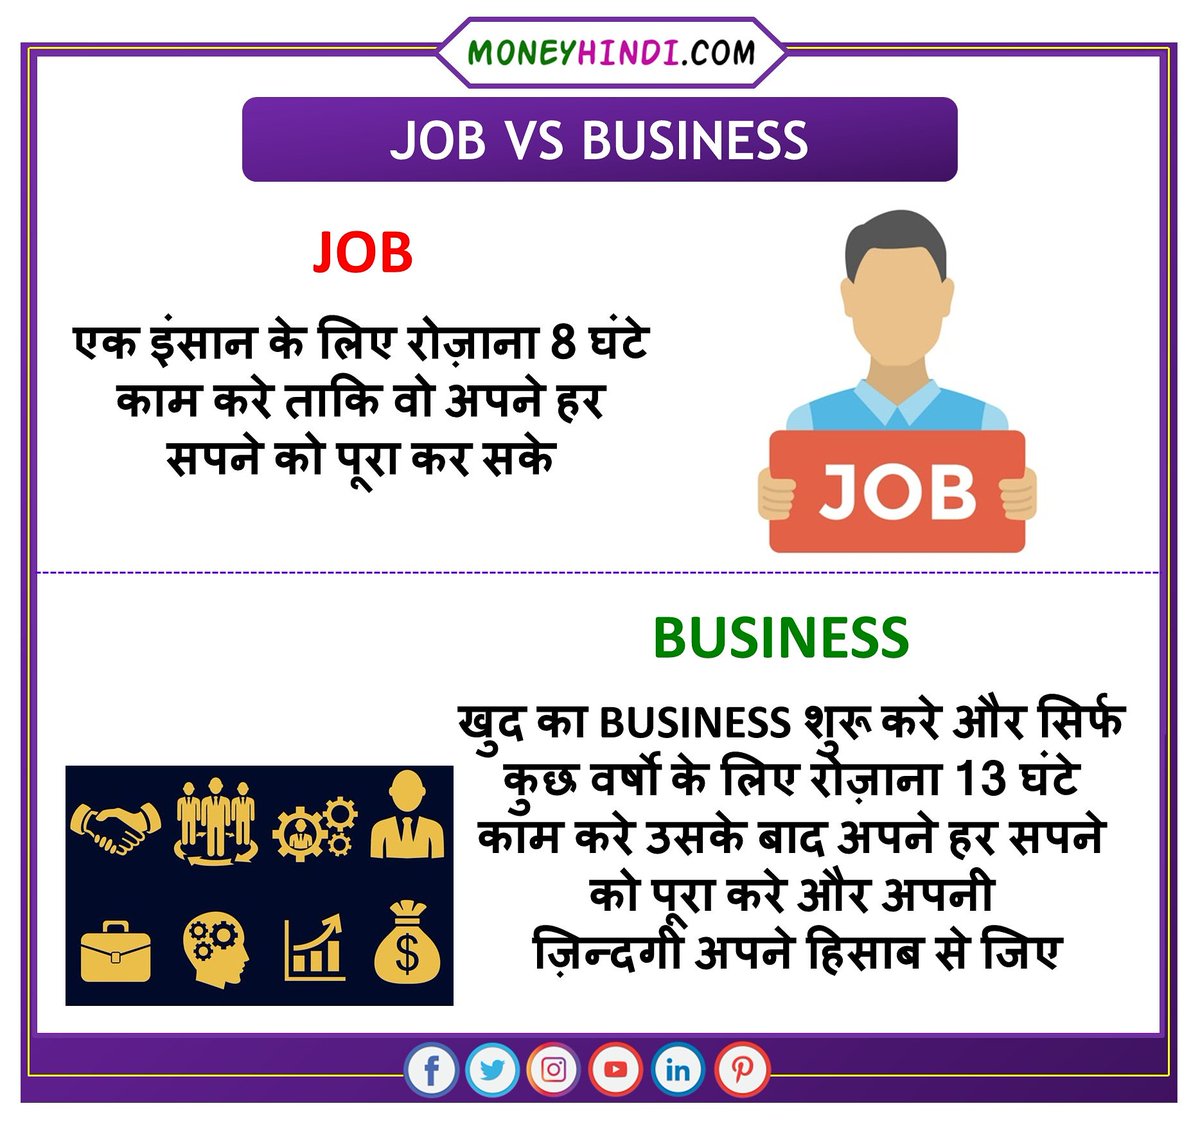 II. Benefits of Learning Hindi for Business Communication